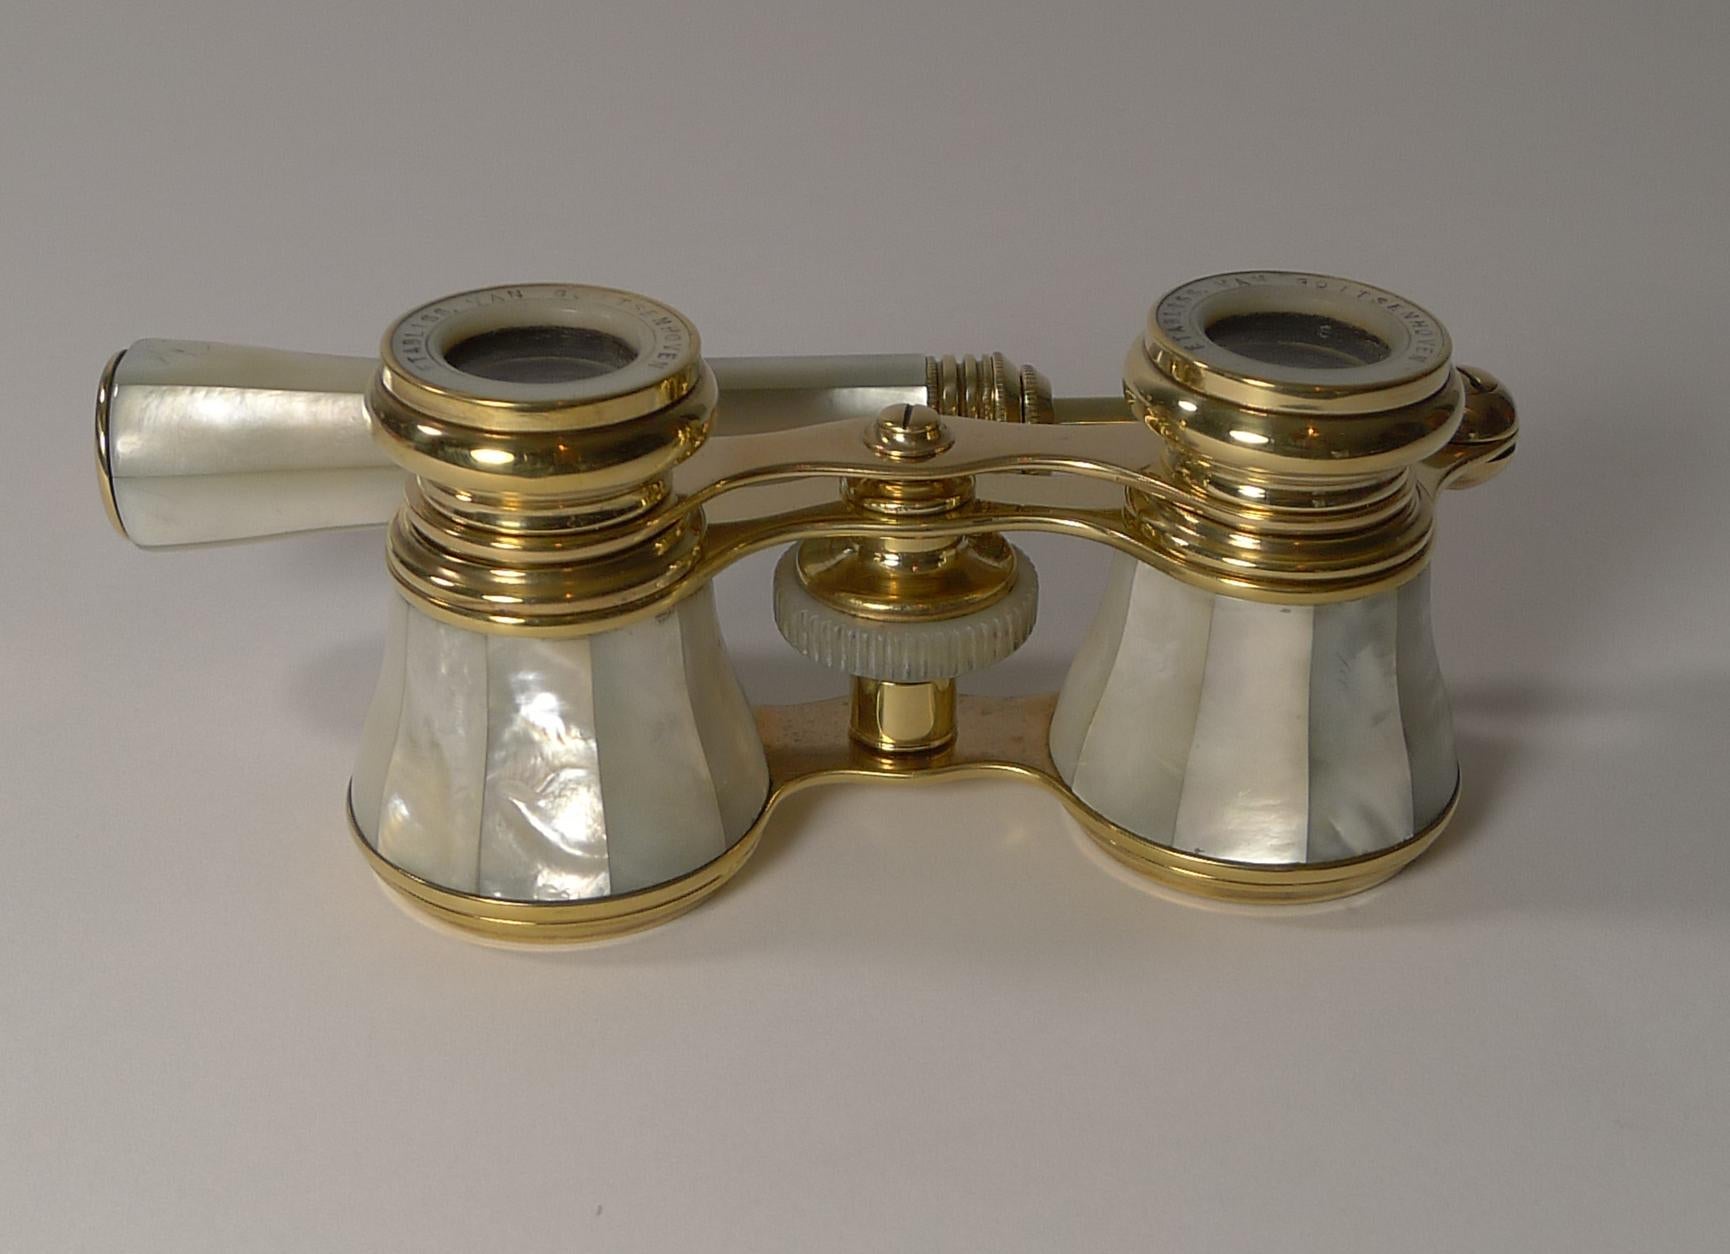 Edwardian Pair of Antique French Opera Glasses by Colmont, Paris